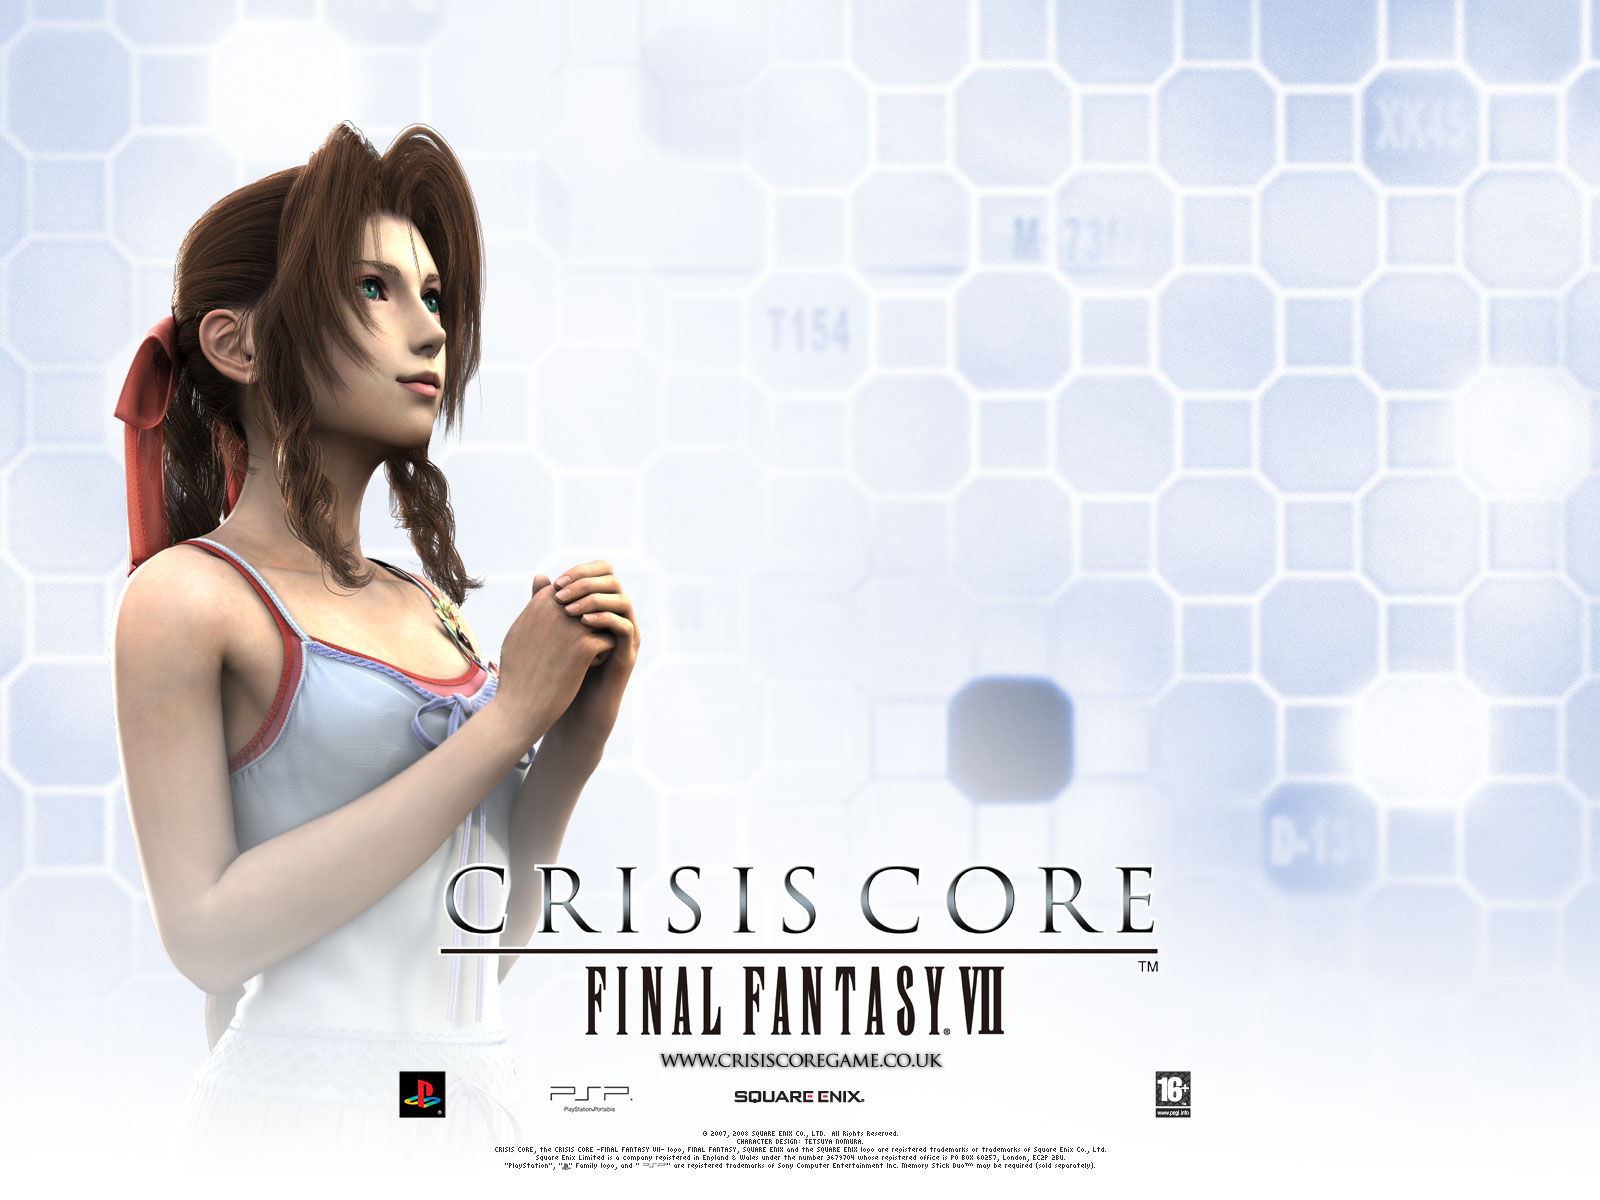 Crisis core final fantasy vii psp highly compressed game for.